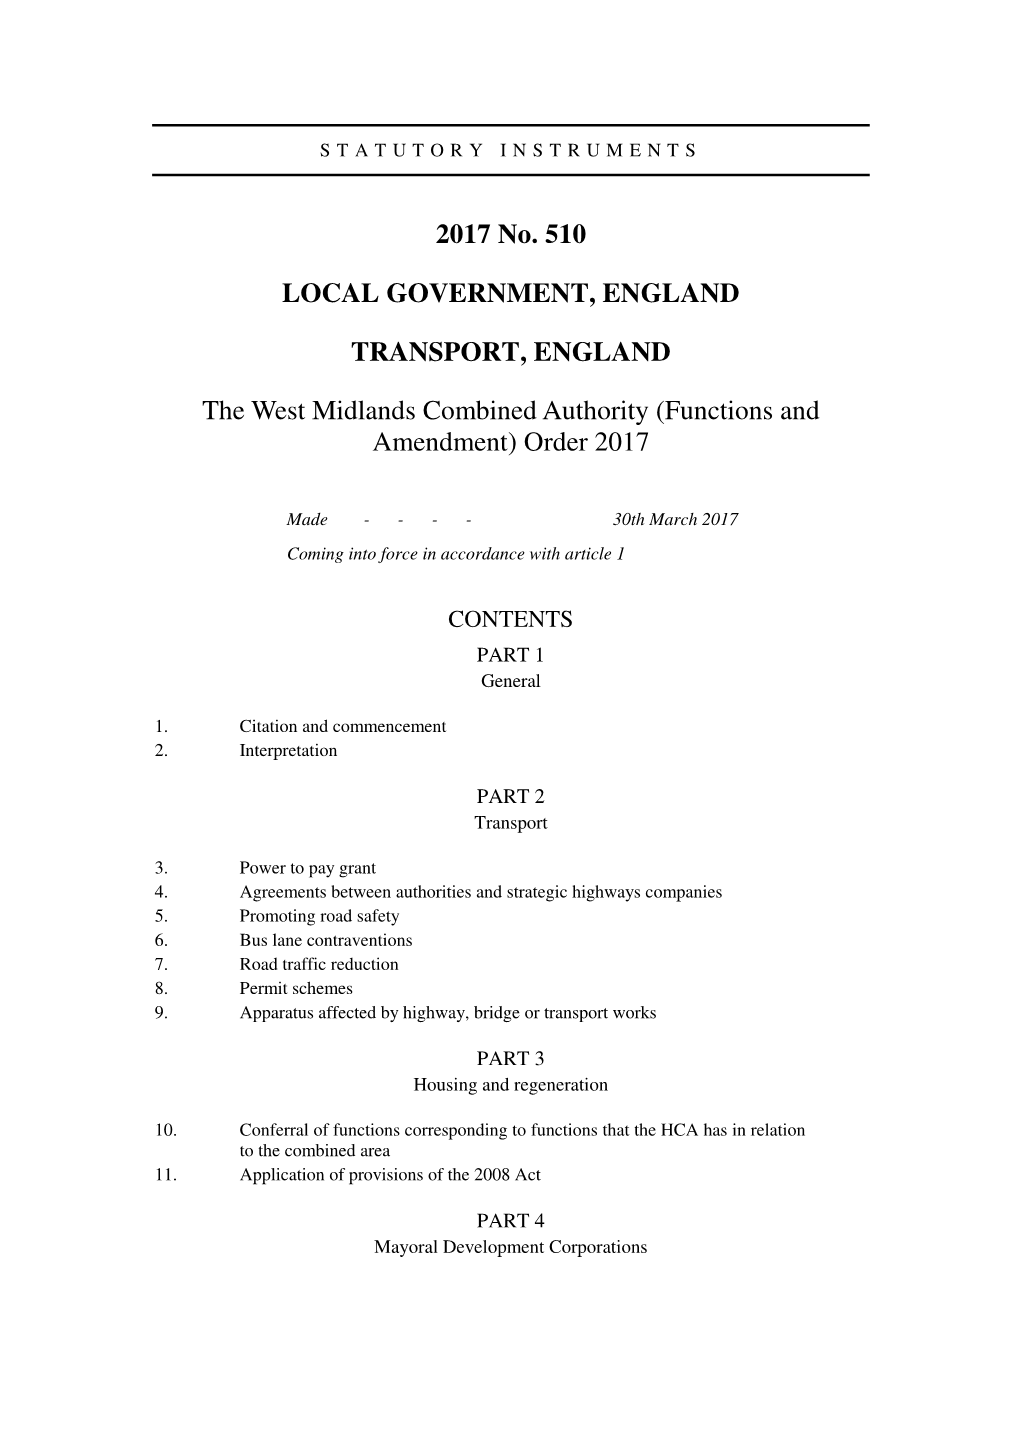 The West Midlands Combined Authority (Functions and Amendment) Order 2017